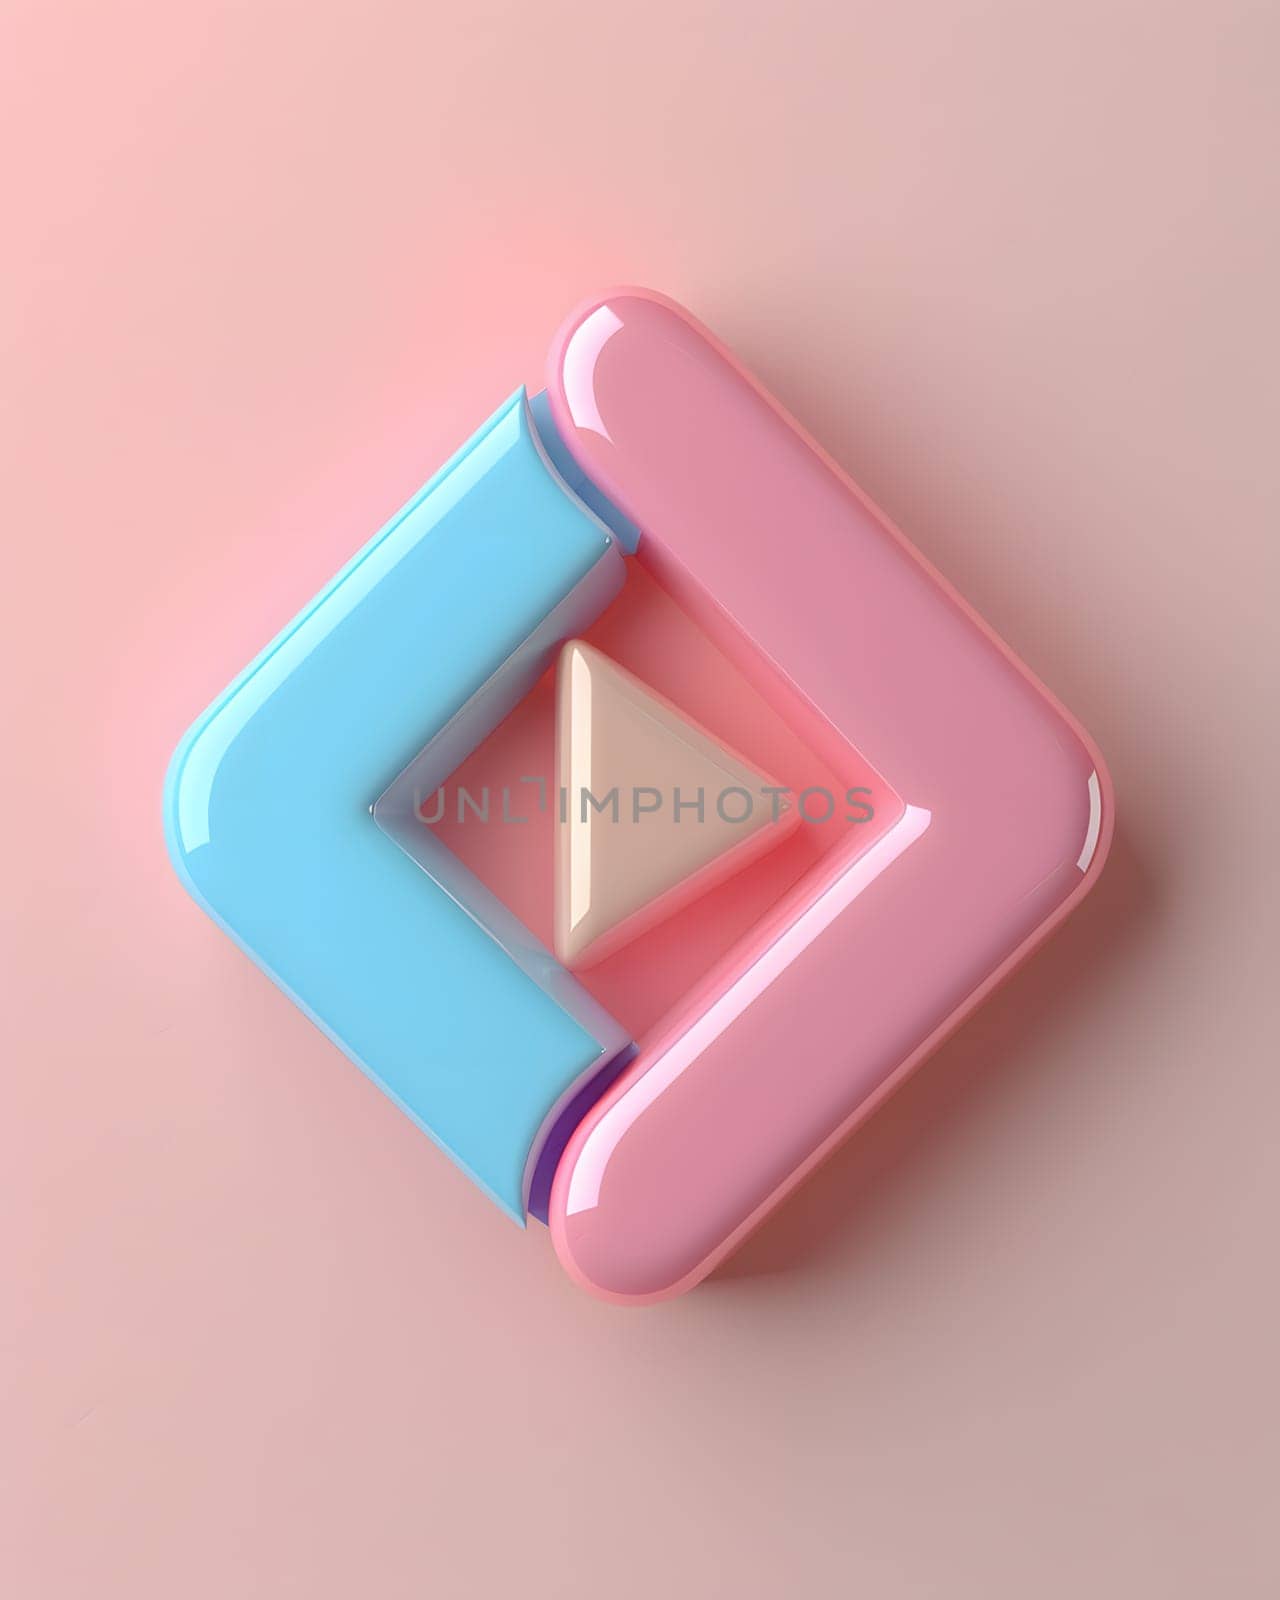 An electric blue arrow and magenta triangle on a pink background create a trendy fashion accessory. The geometric shapes are reminiscent of symbols and the plastic design is stylish